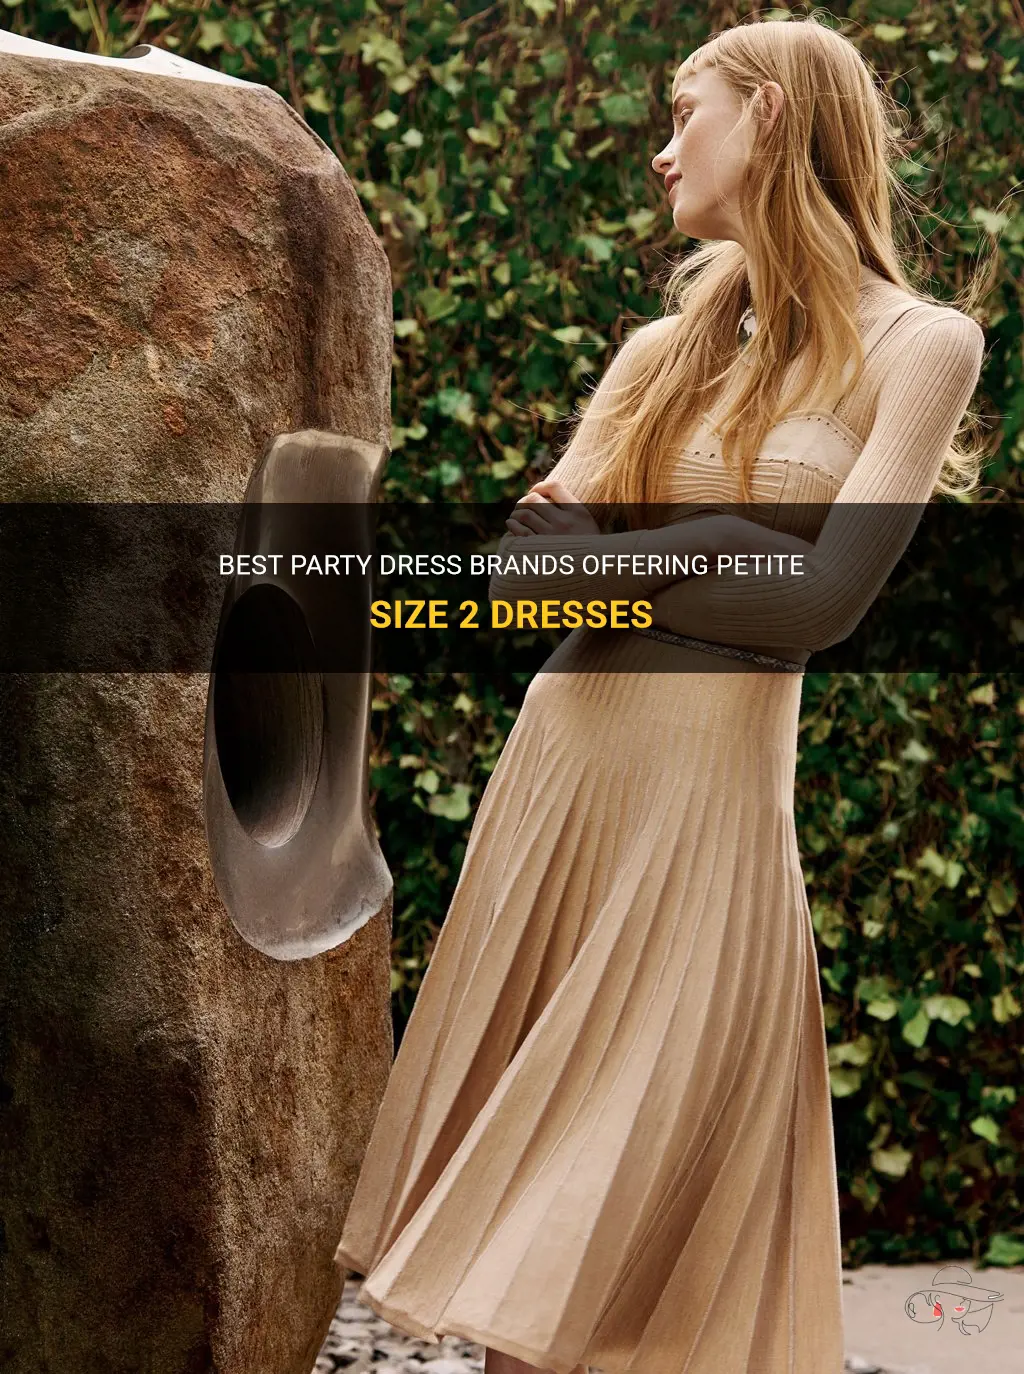 what brand party dresses carry petite size 2